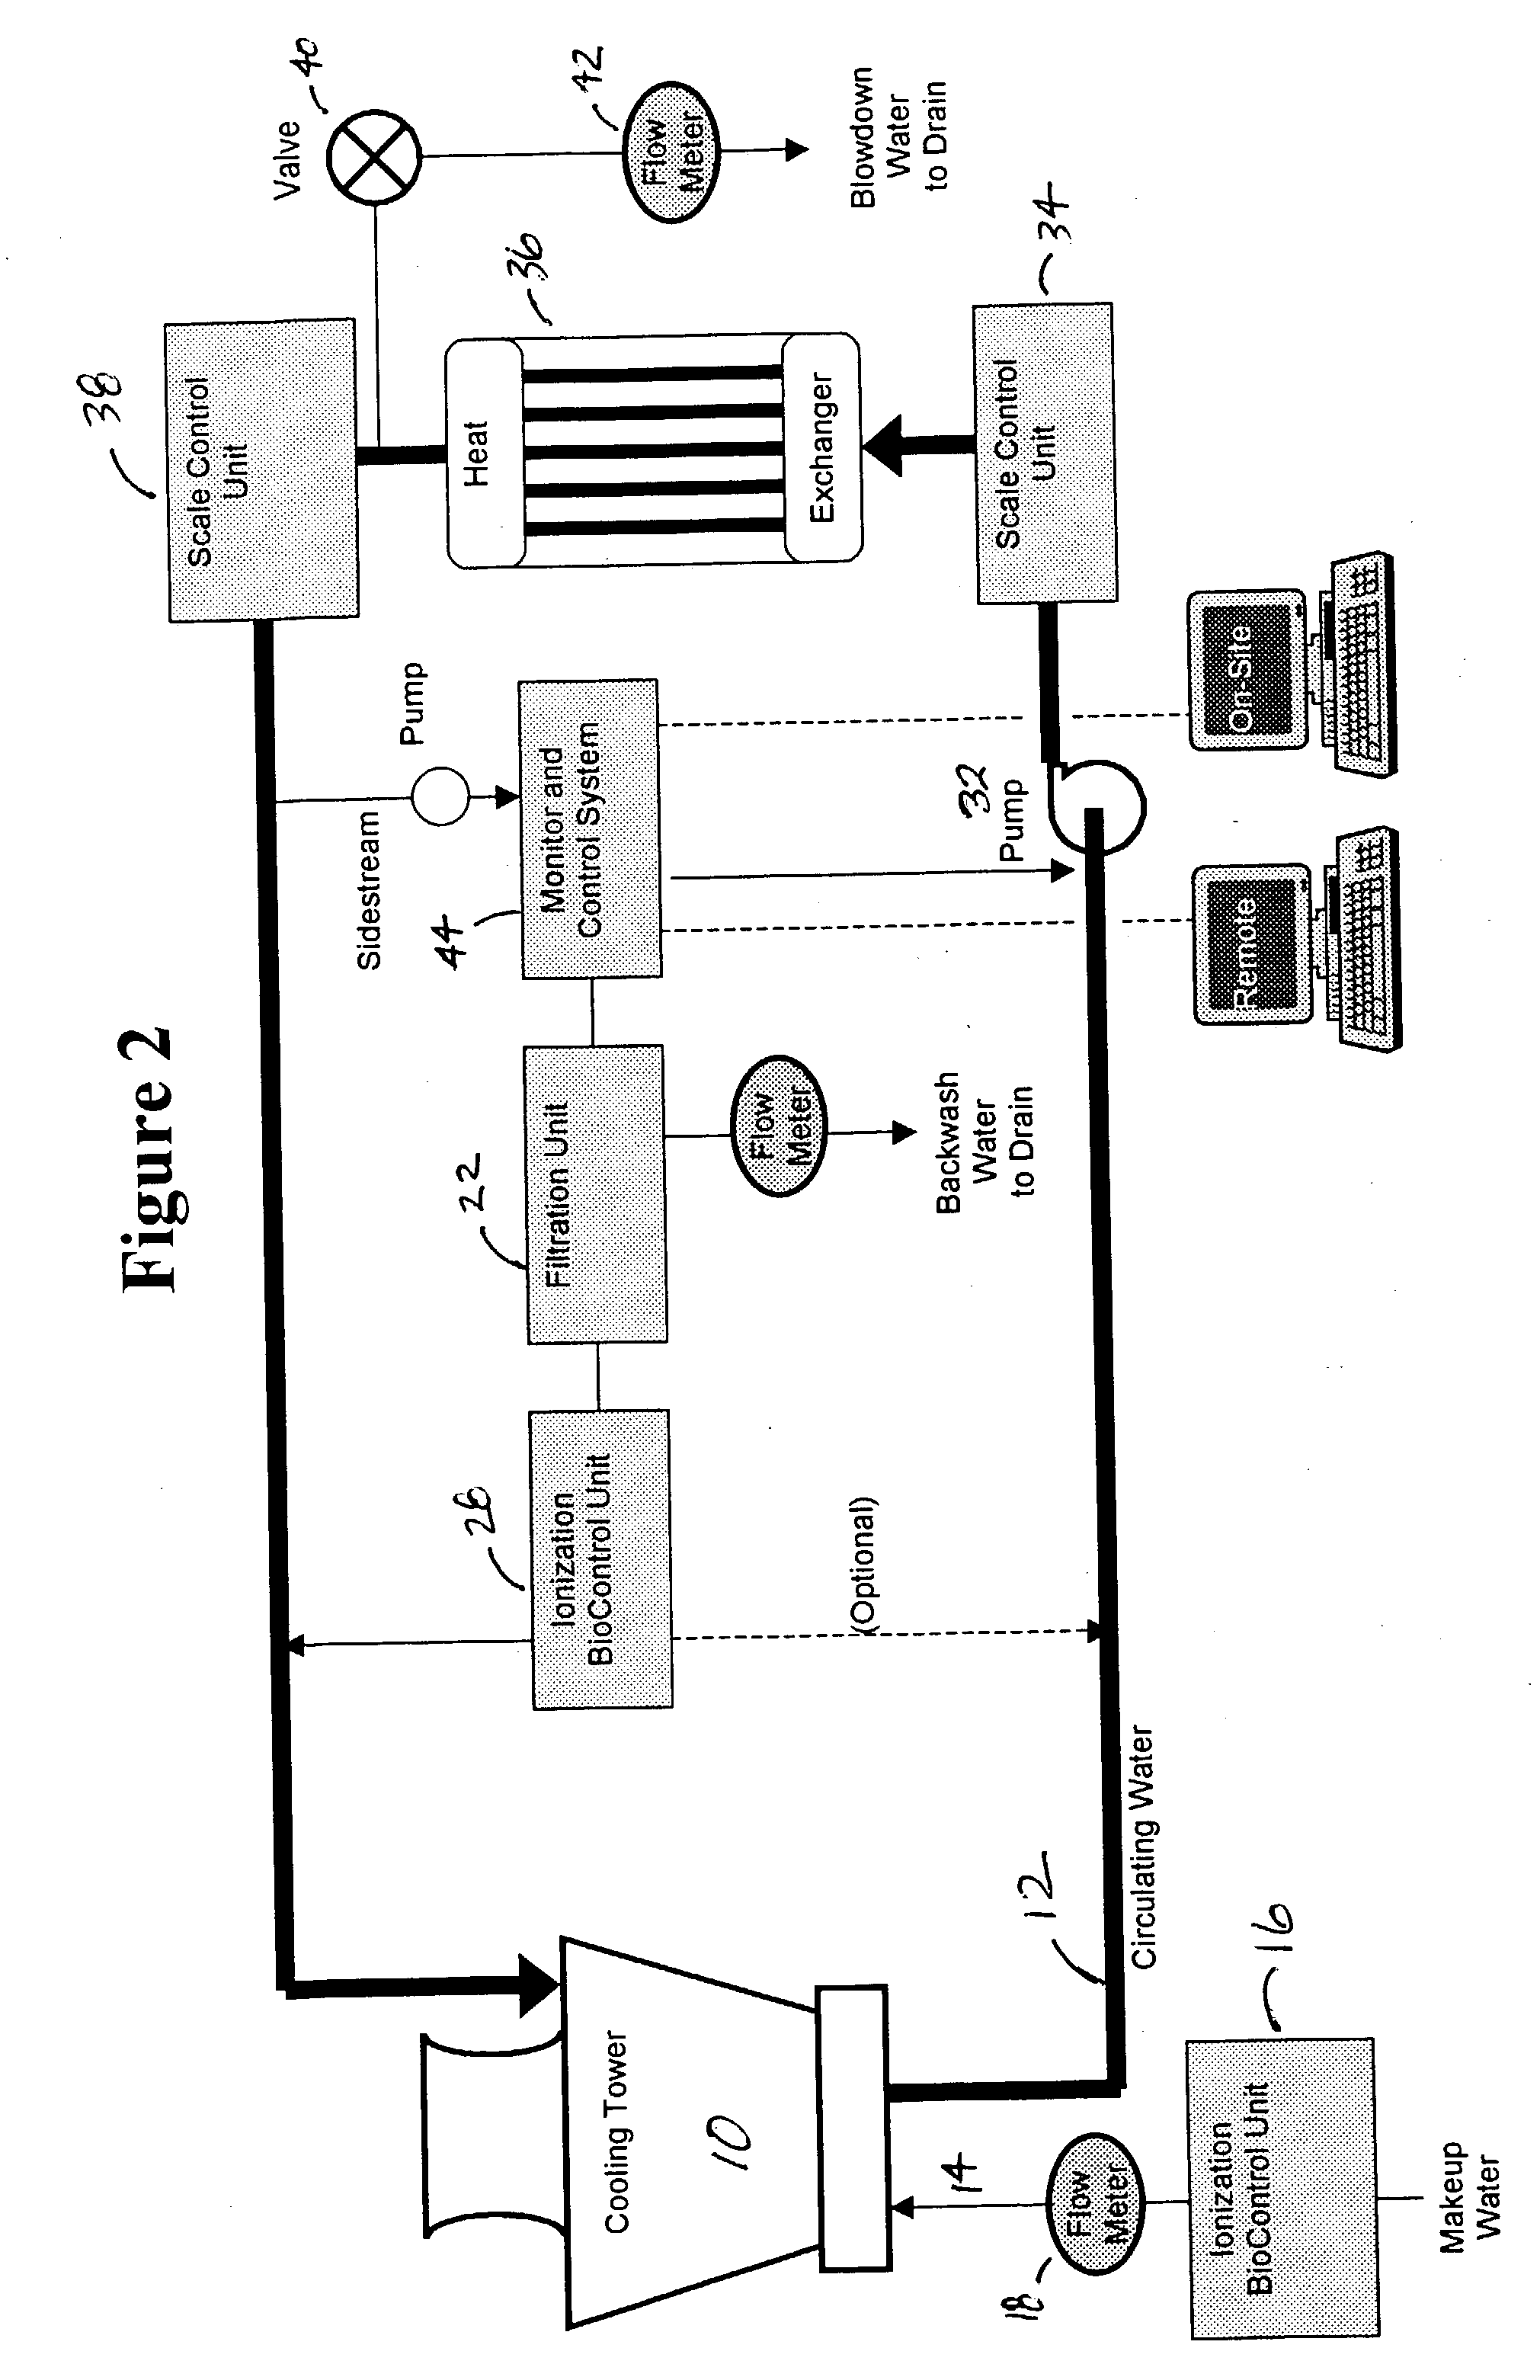 Apparatus, system and method for non-chemical treatment and management of cooling water